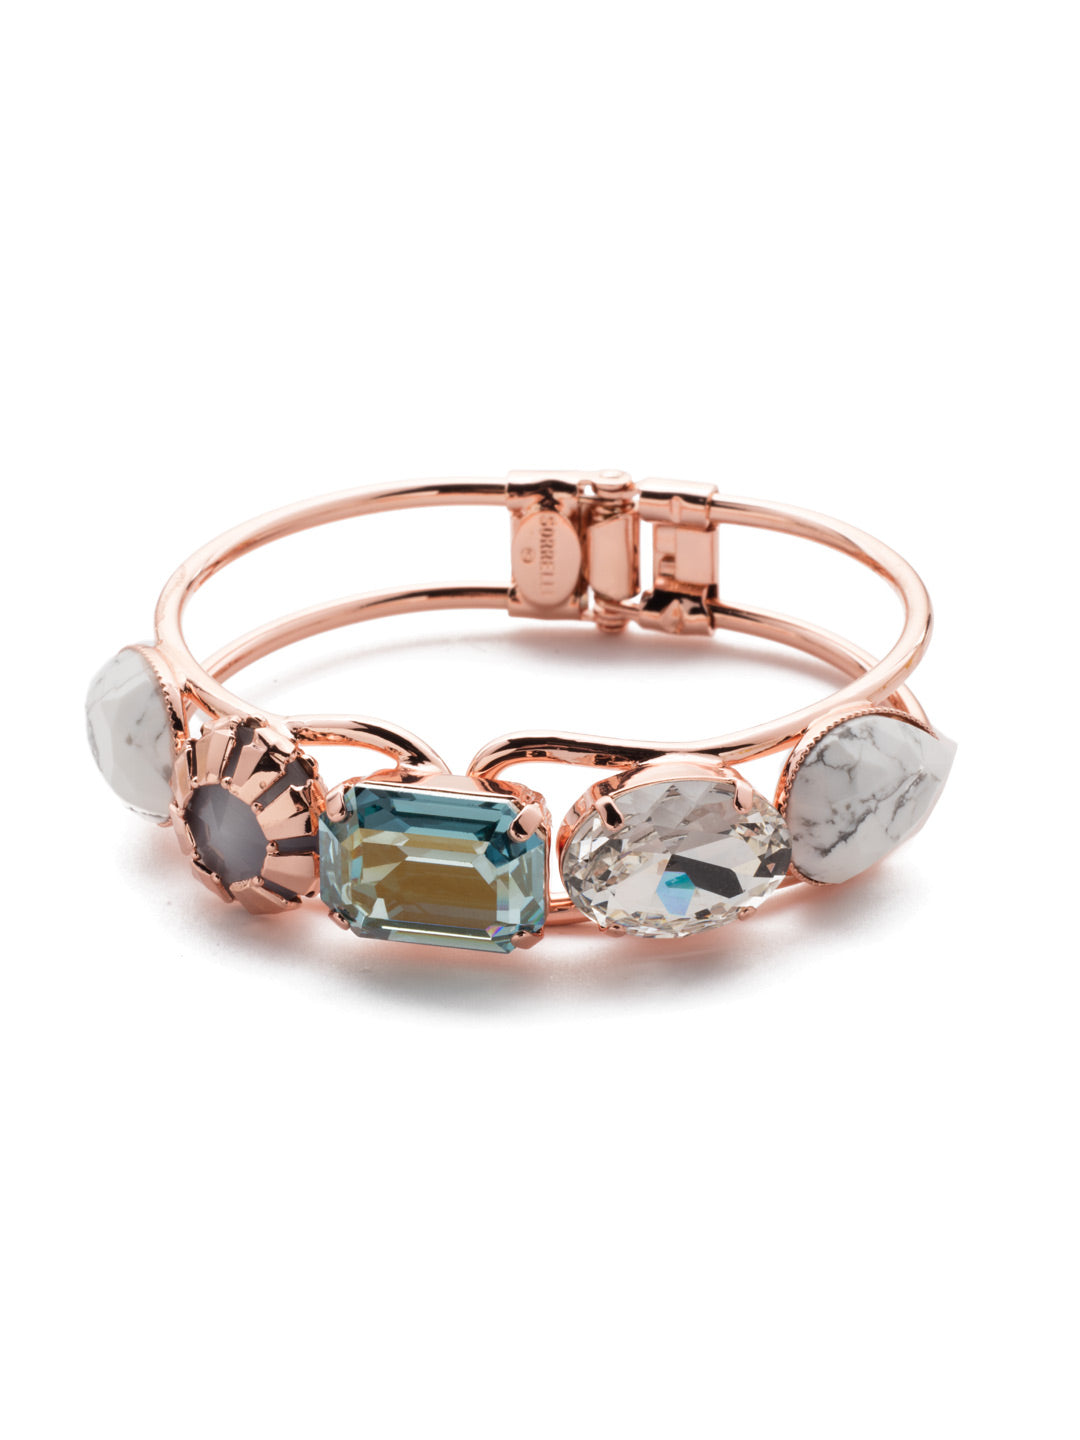 Bianca Cuff Bracelet - BET57RGCAZ - Our Bianca Cuff Bracelet makes a big statement with standout stones featuring earth tones and sparkle too, set on an airy double-linked metal band. From Sorrelli's Crystal Azure collection in our Rose Gold-tone finish.